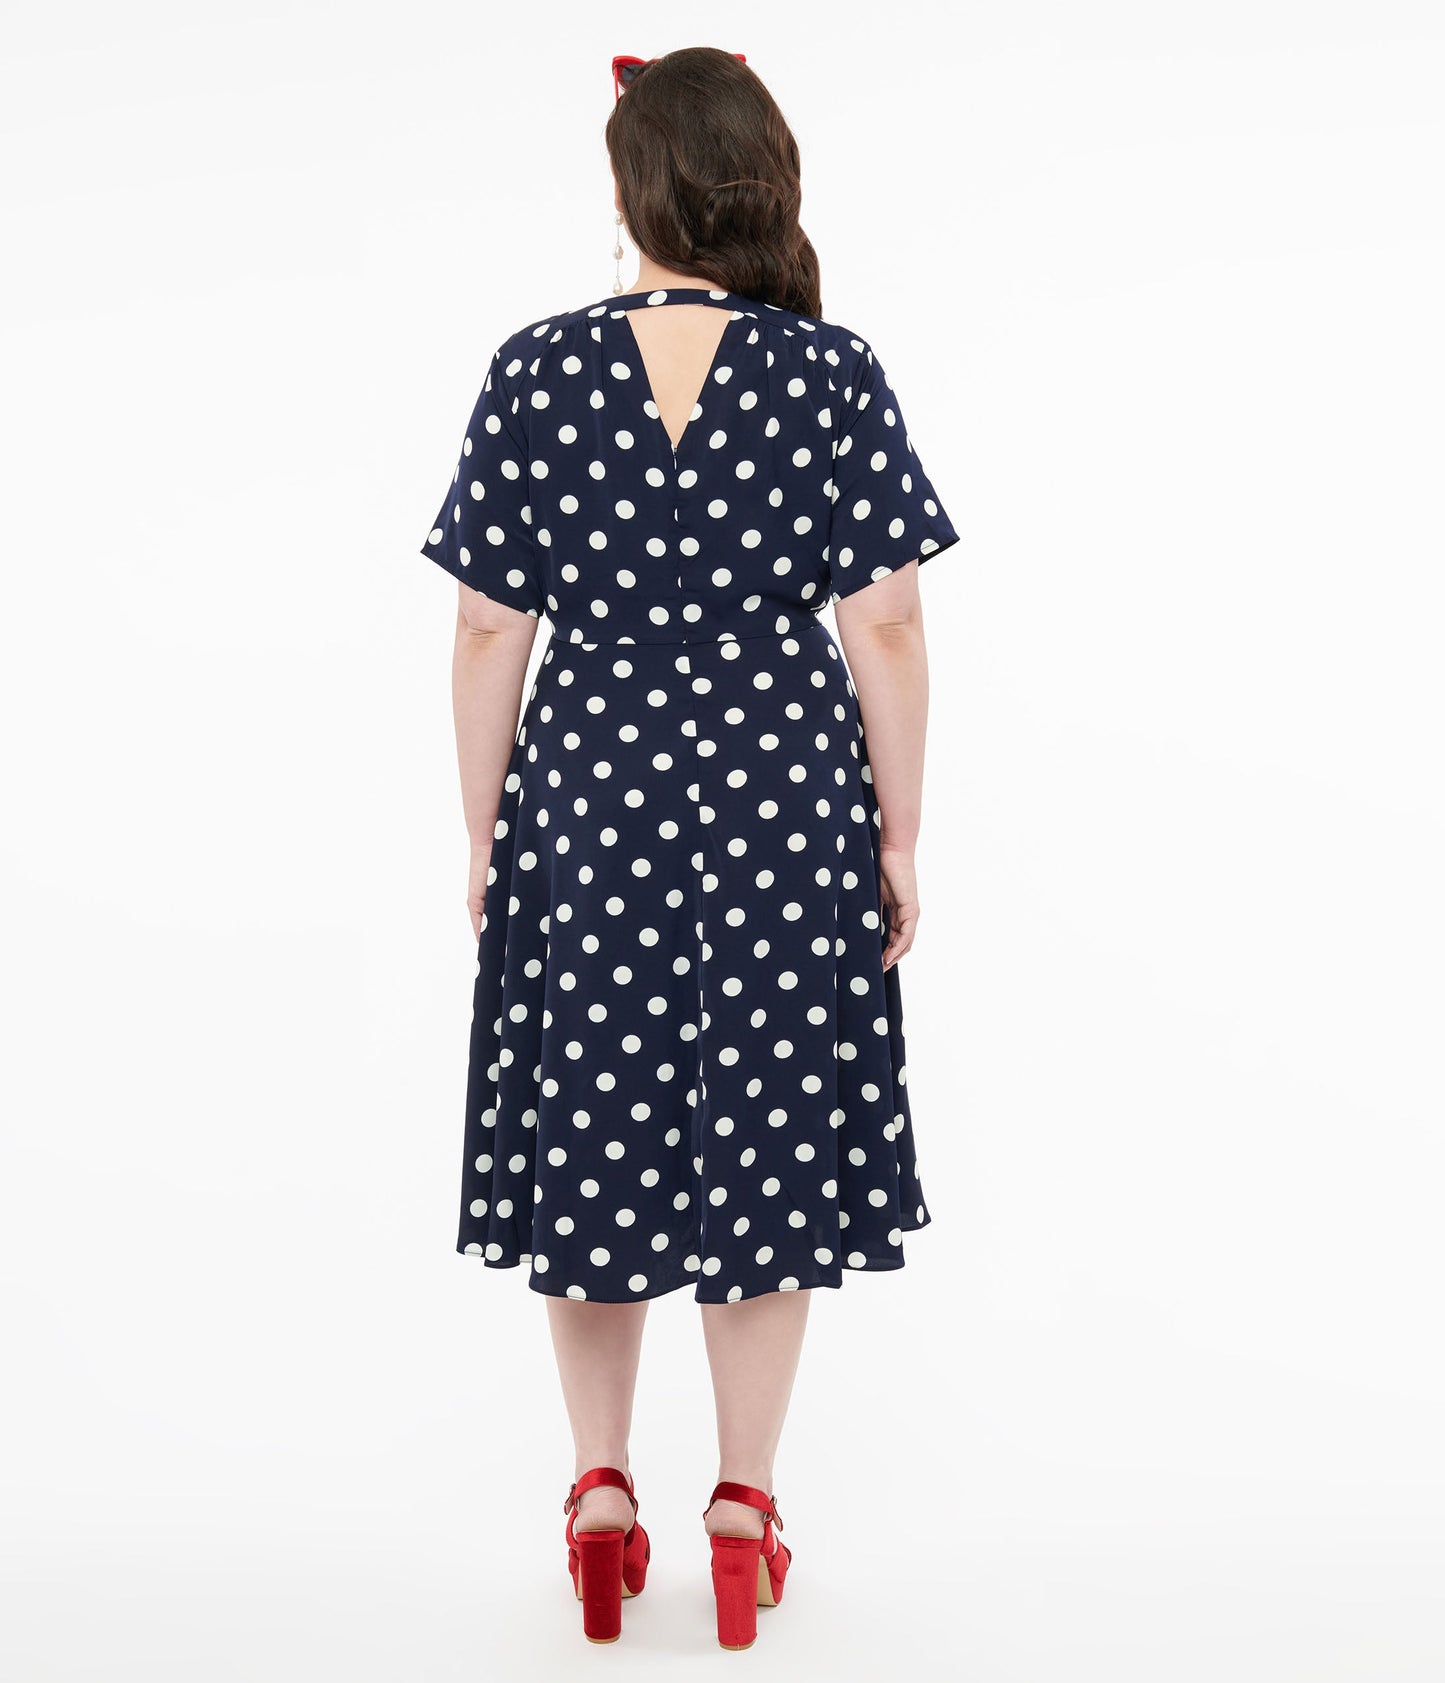 Plus Size 1940s Navy & White Polka Dot Set Sail Swing Dress - Unique Vintage - Womens, DRESSES, FIT AND FLARE